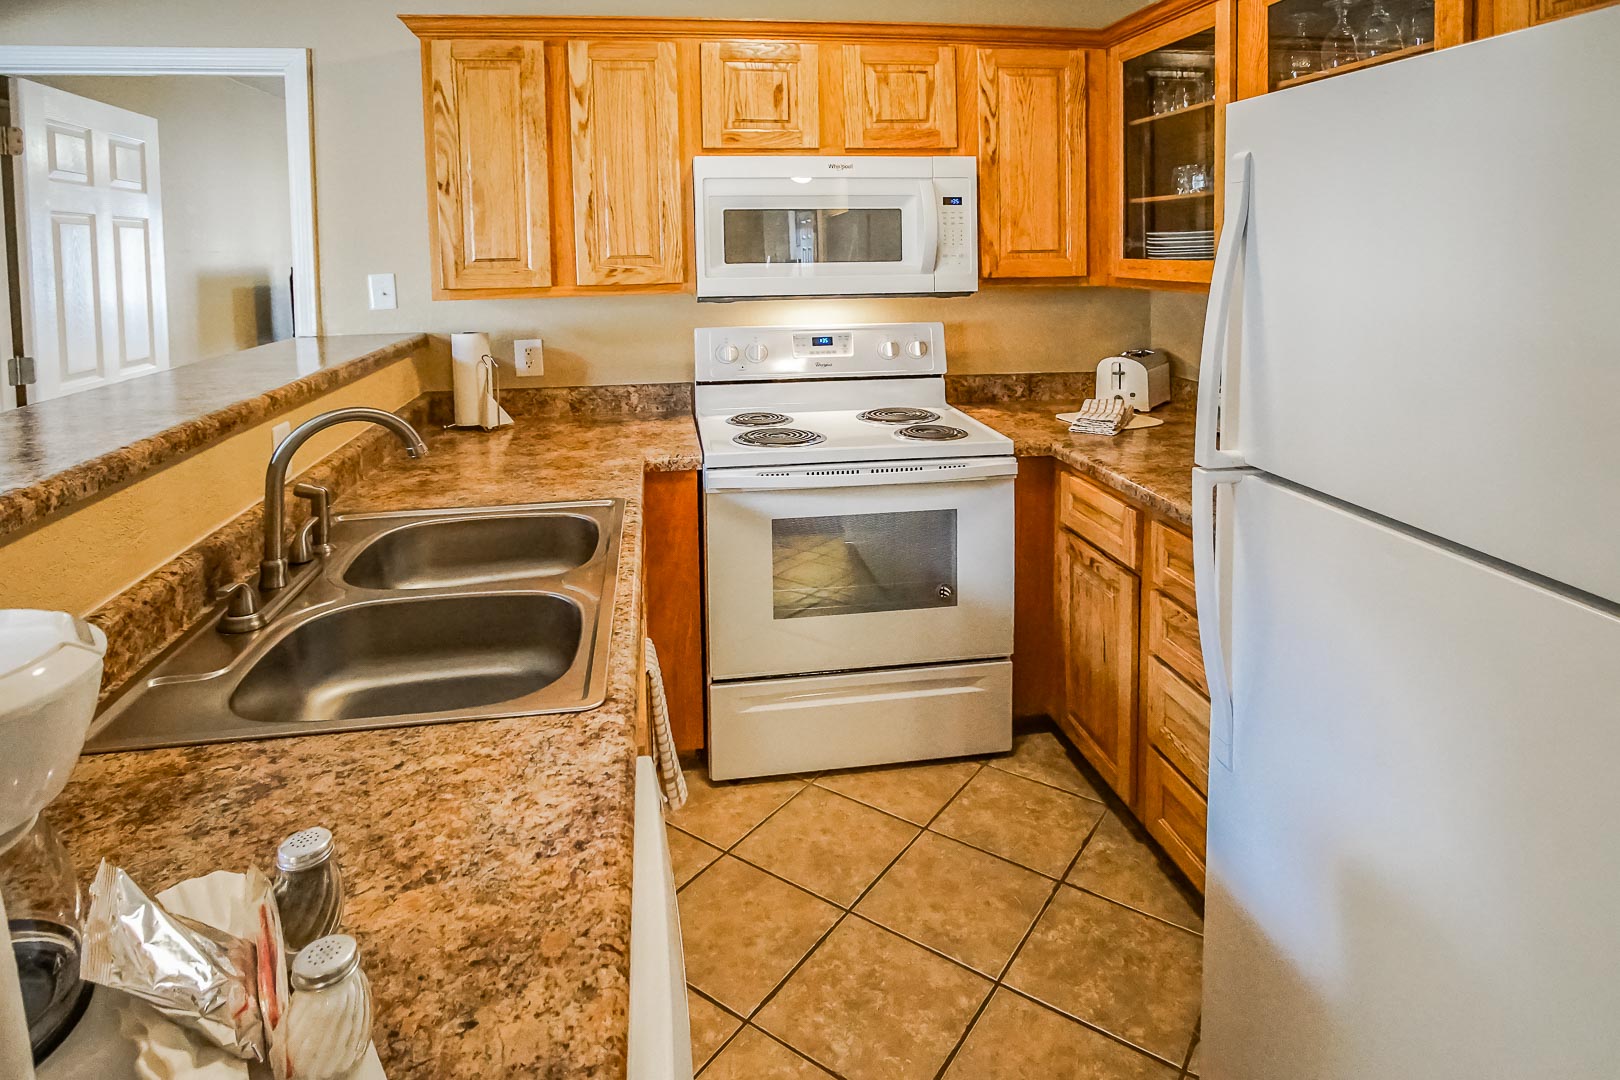 A fully equipped kitchen at The Townhouses Resort in Branson, Missouri.